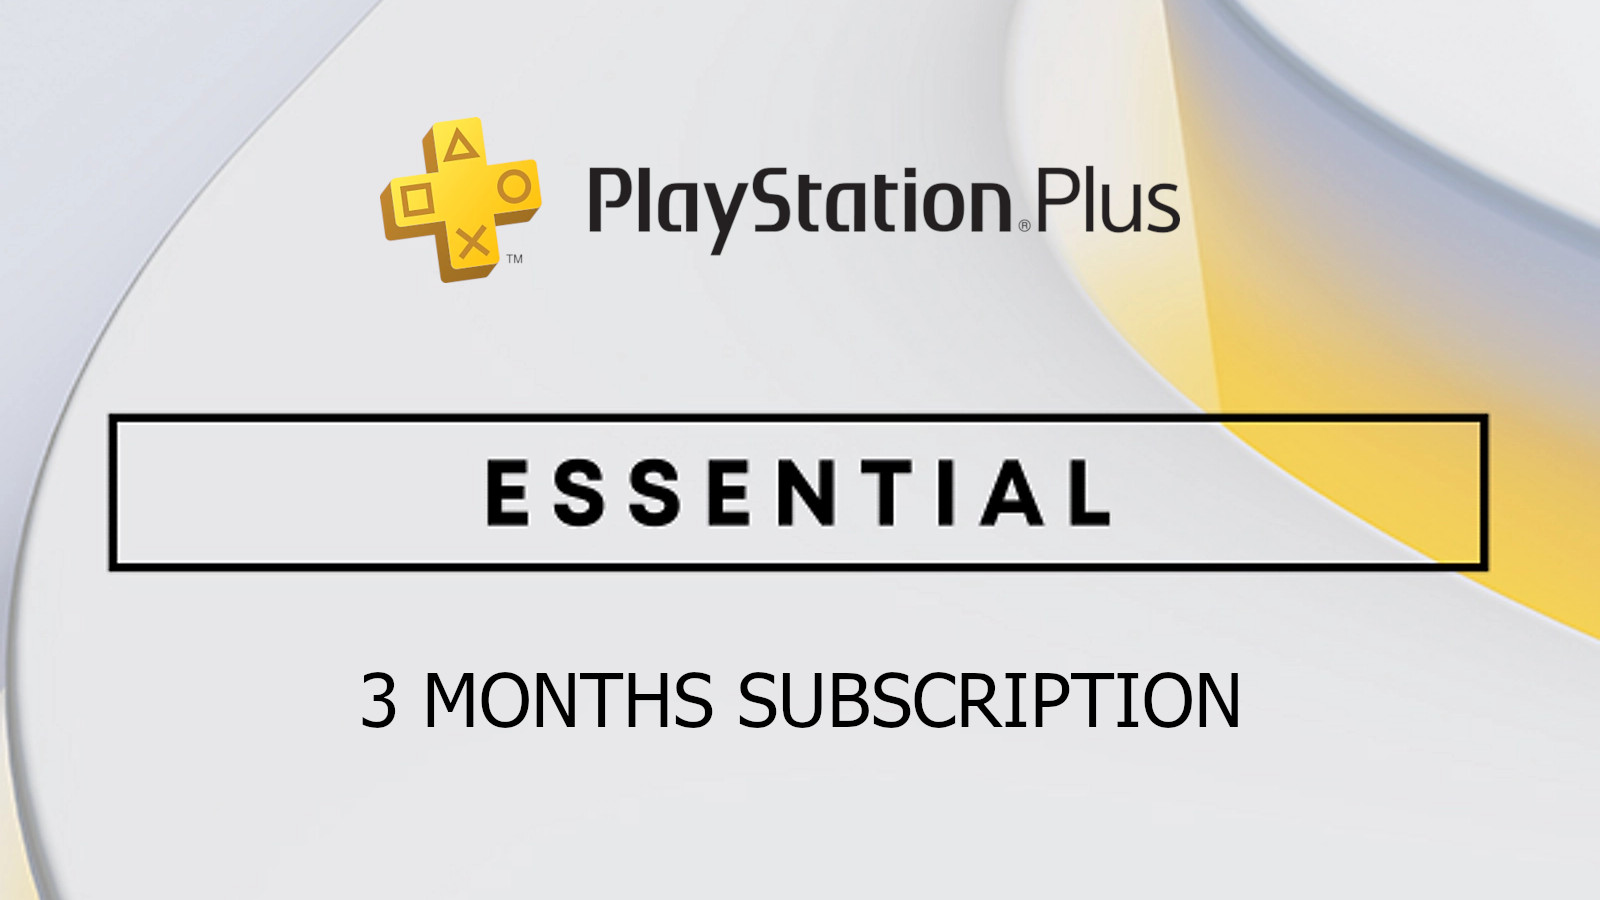 PlayStation Plus Essential 3 Months Subscription US, 32.76 usd